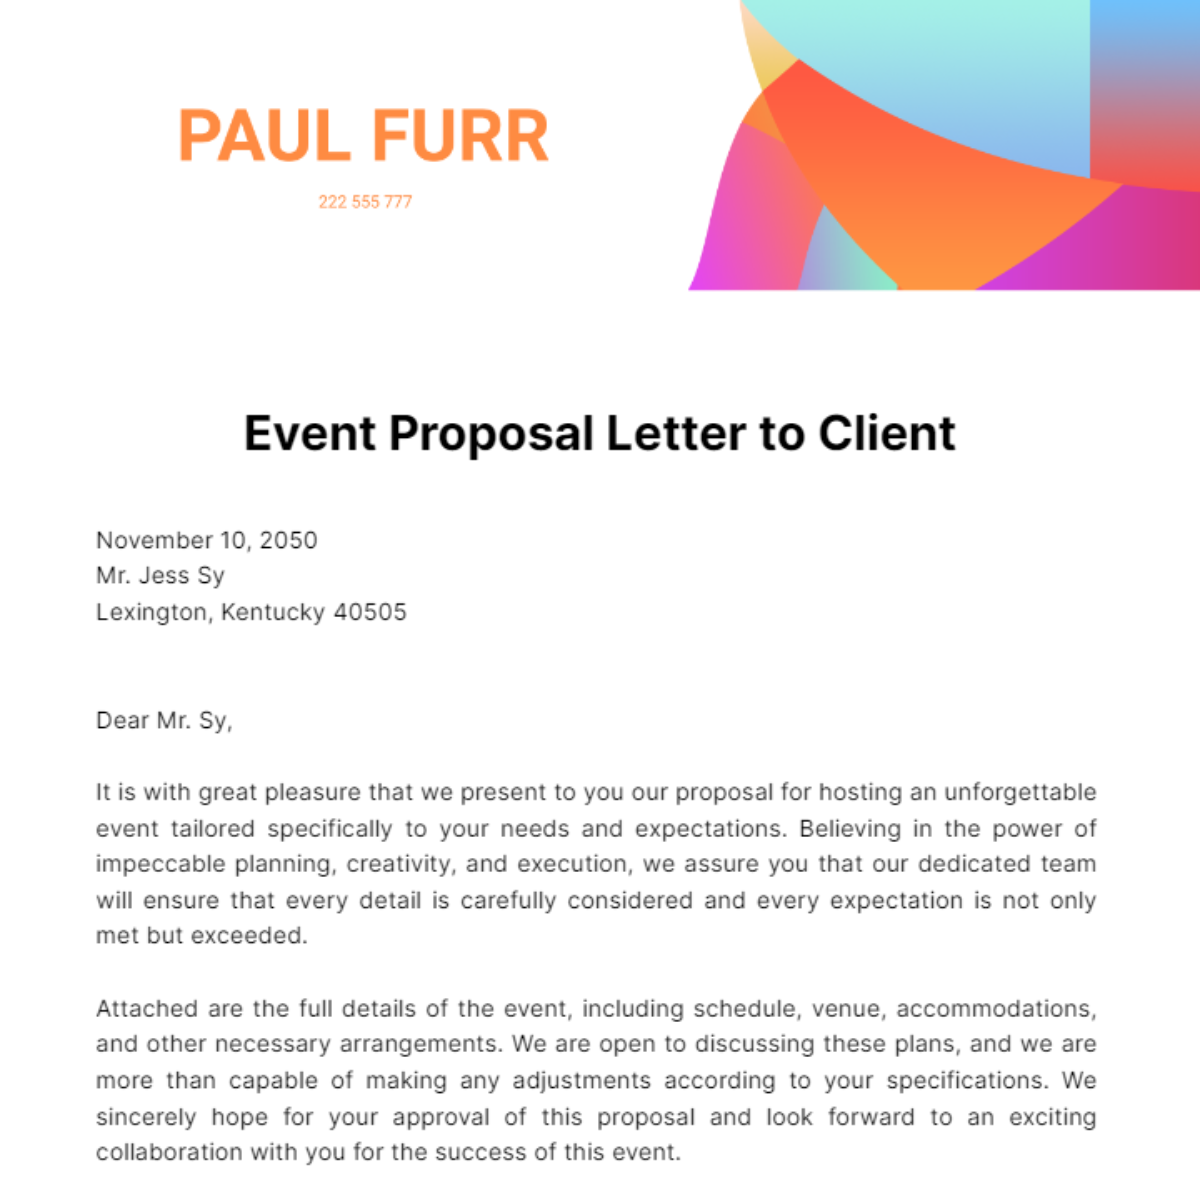 Event Proposal Letter to Client Template